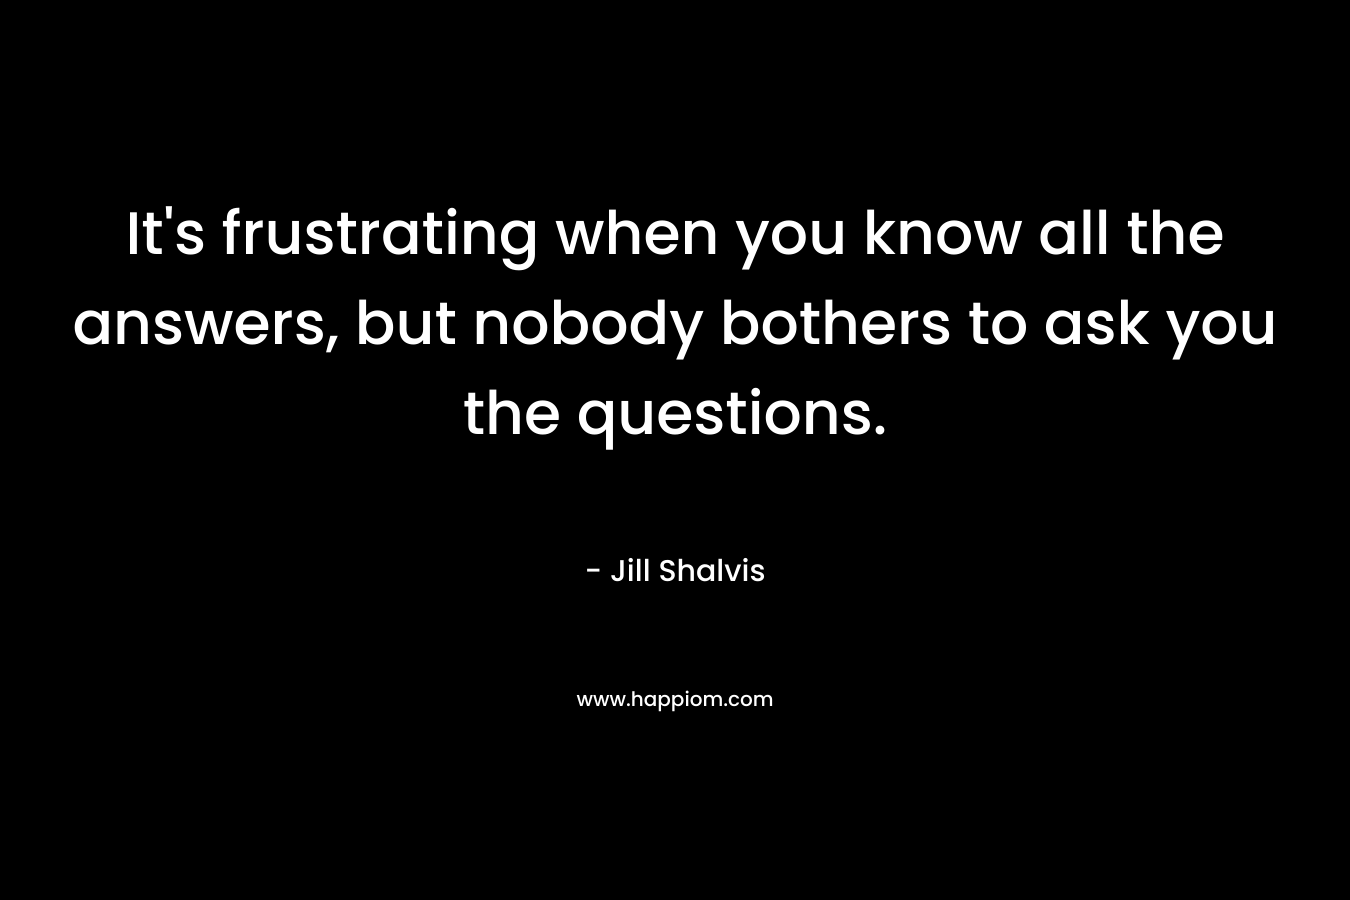 It's frustrating when you know all the answers, but nobody bothers to ask you the questions.